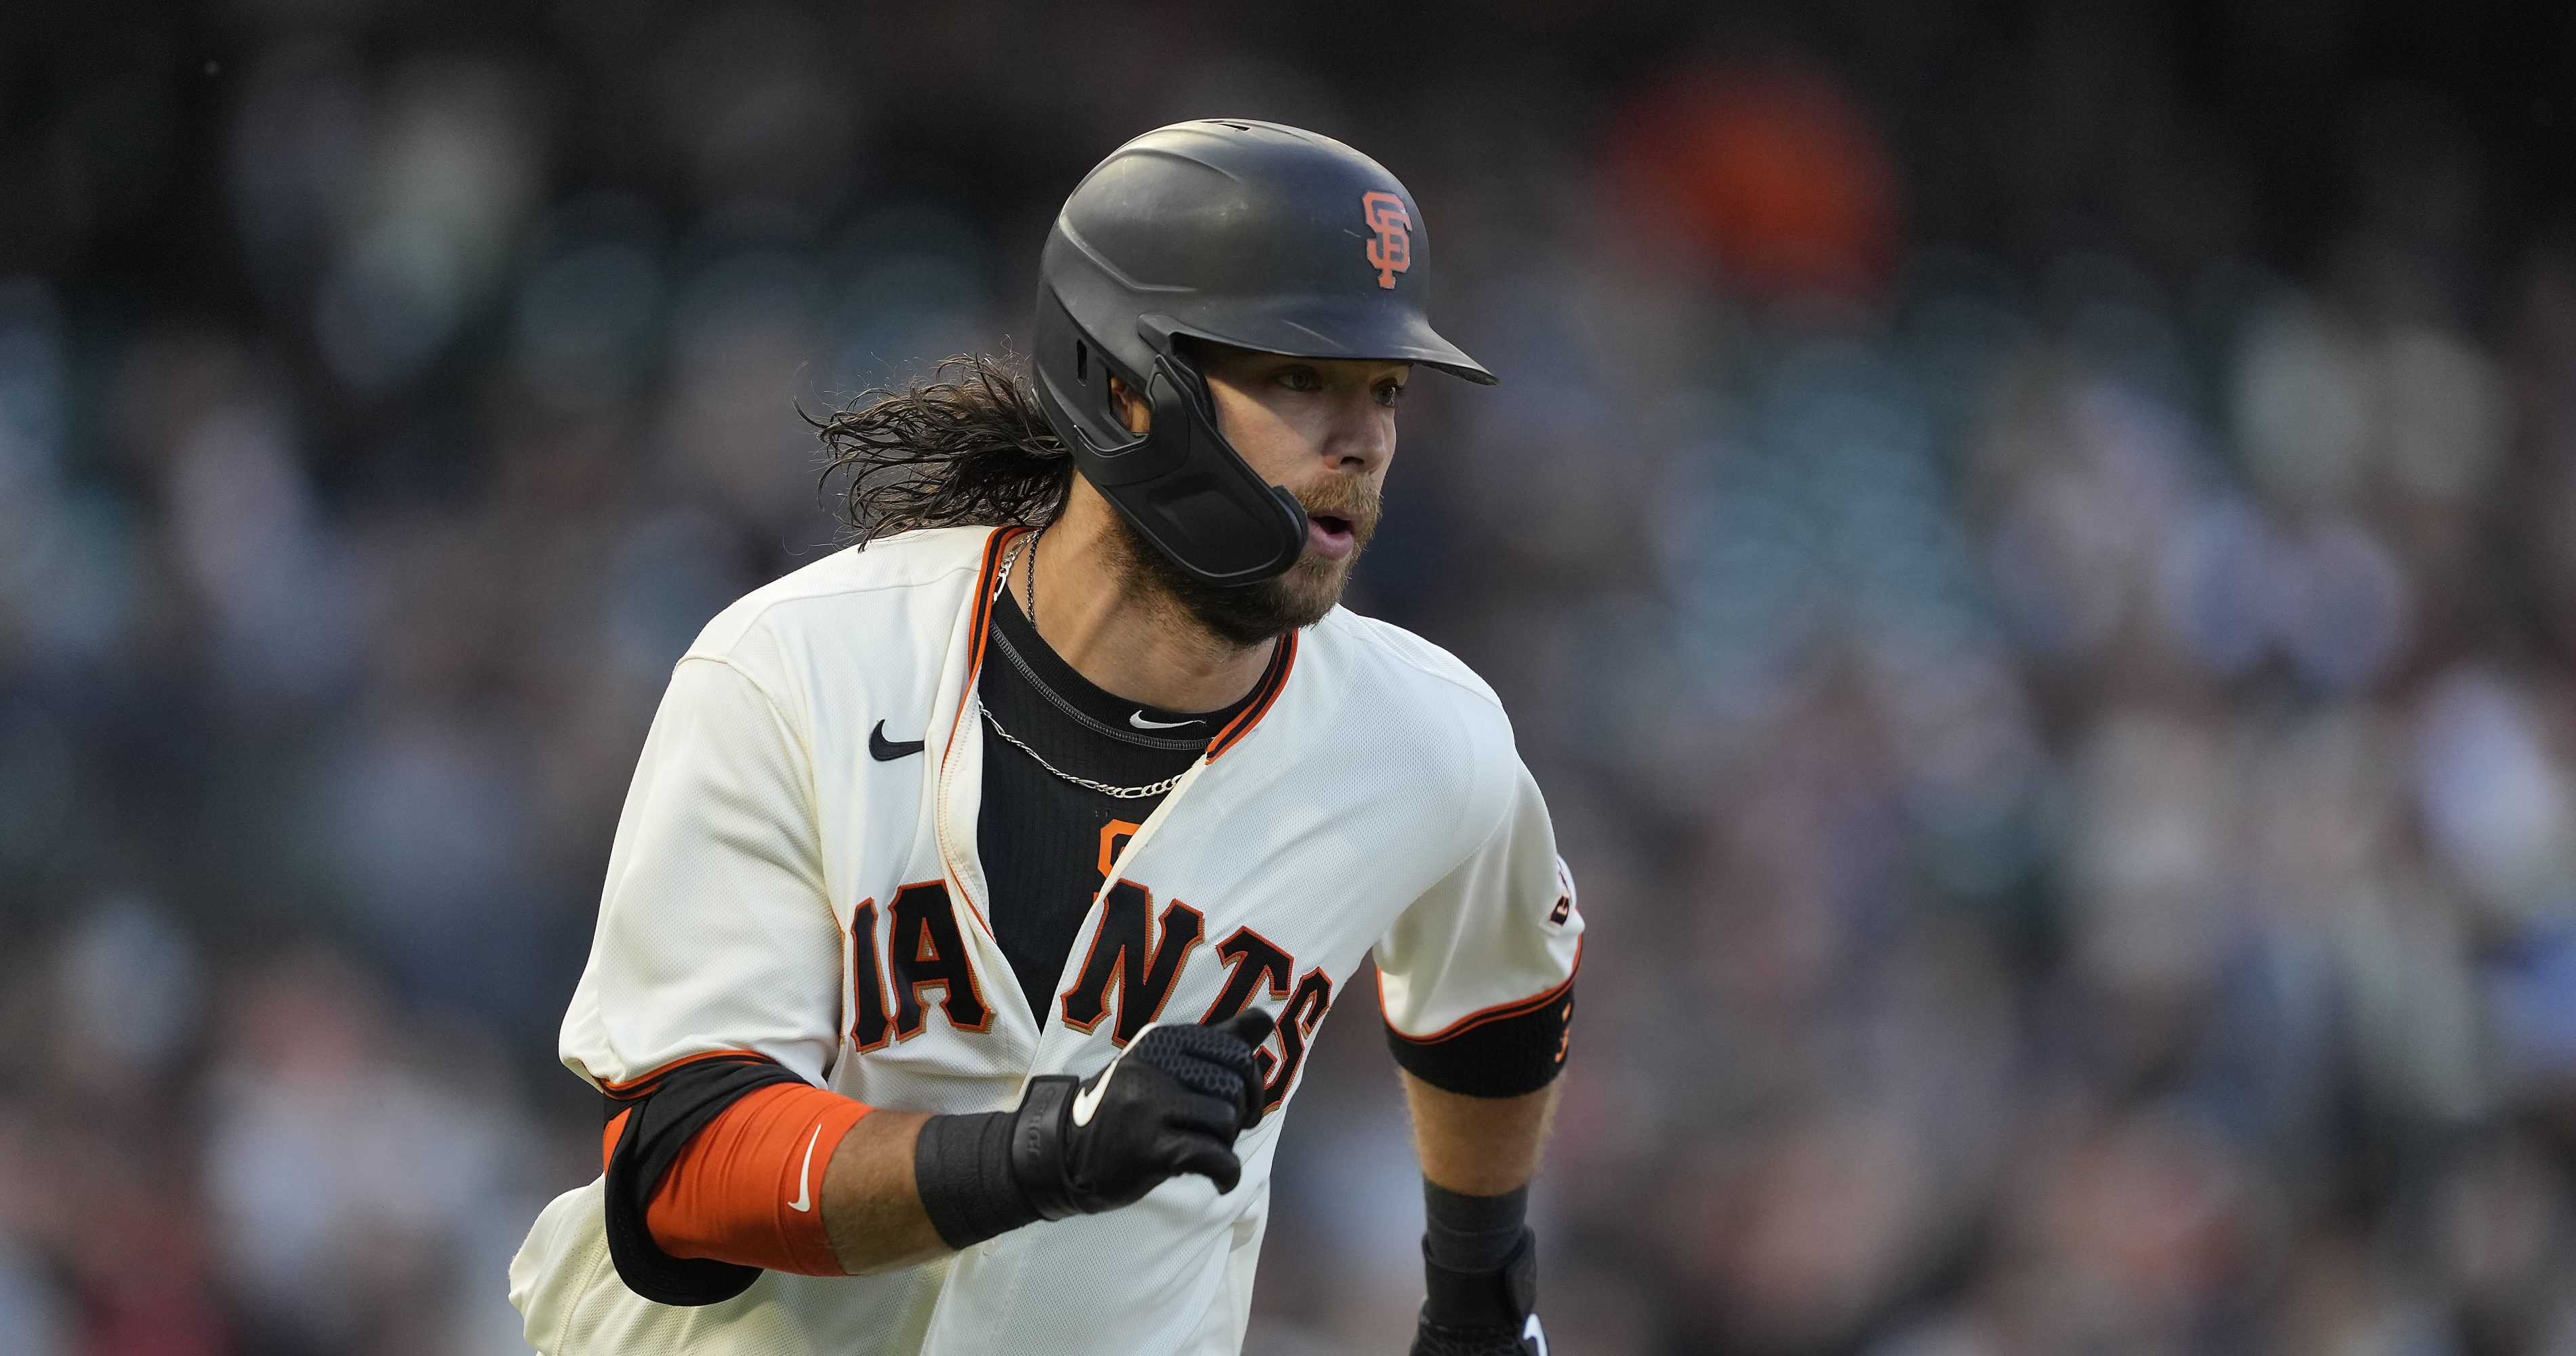 Giants' Brandon Crawford deserves an ovation fit for an all-time great